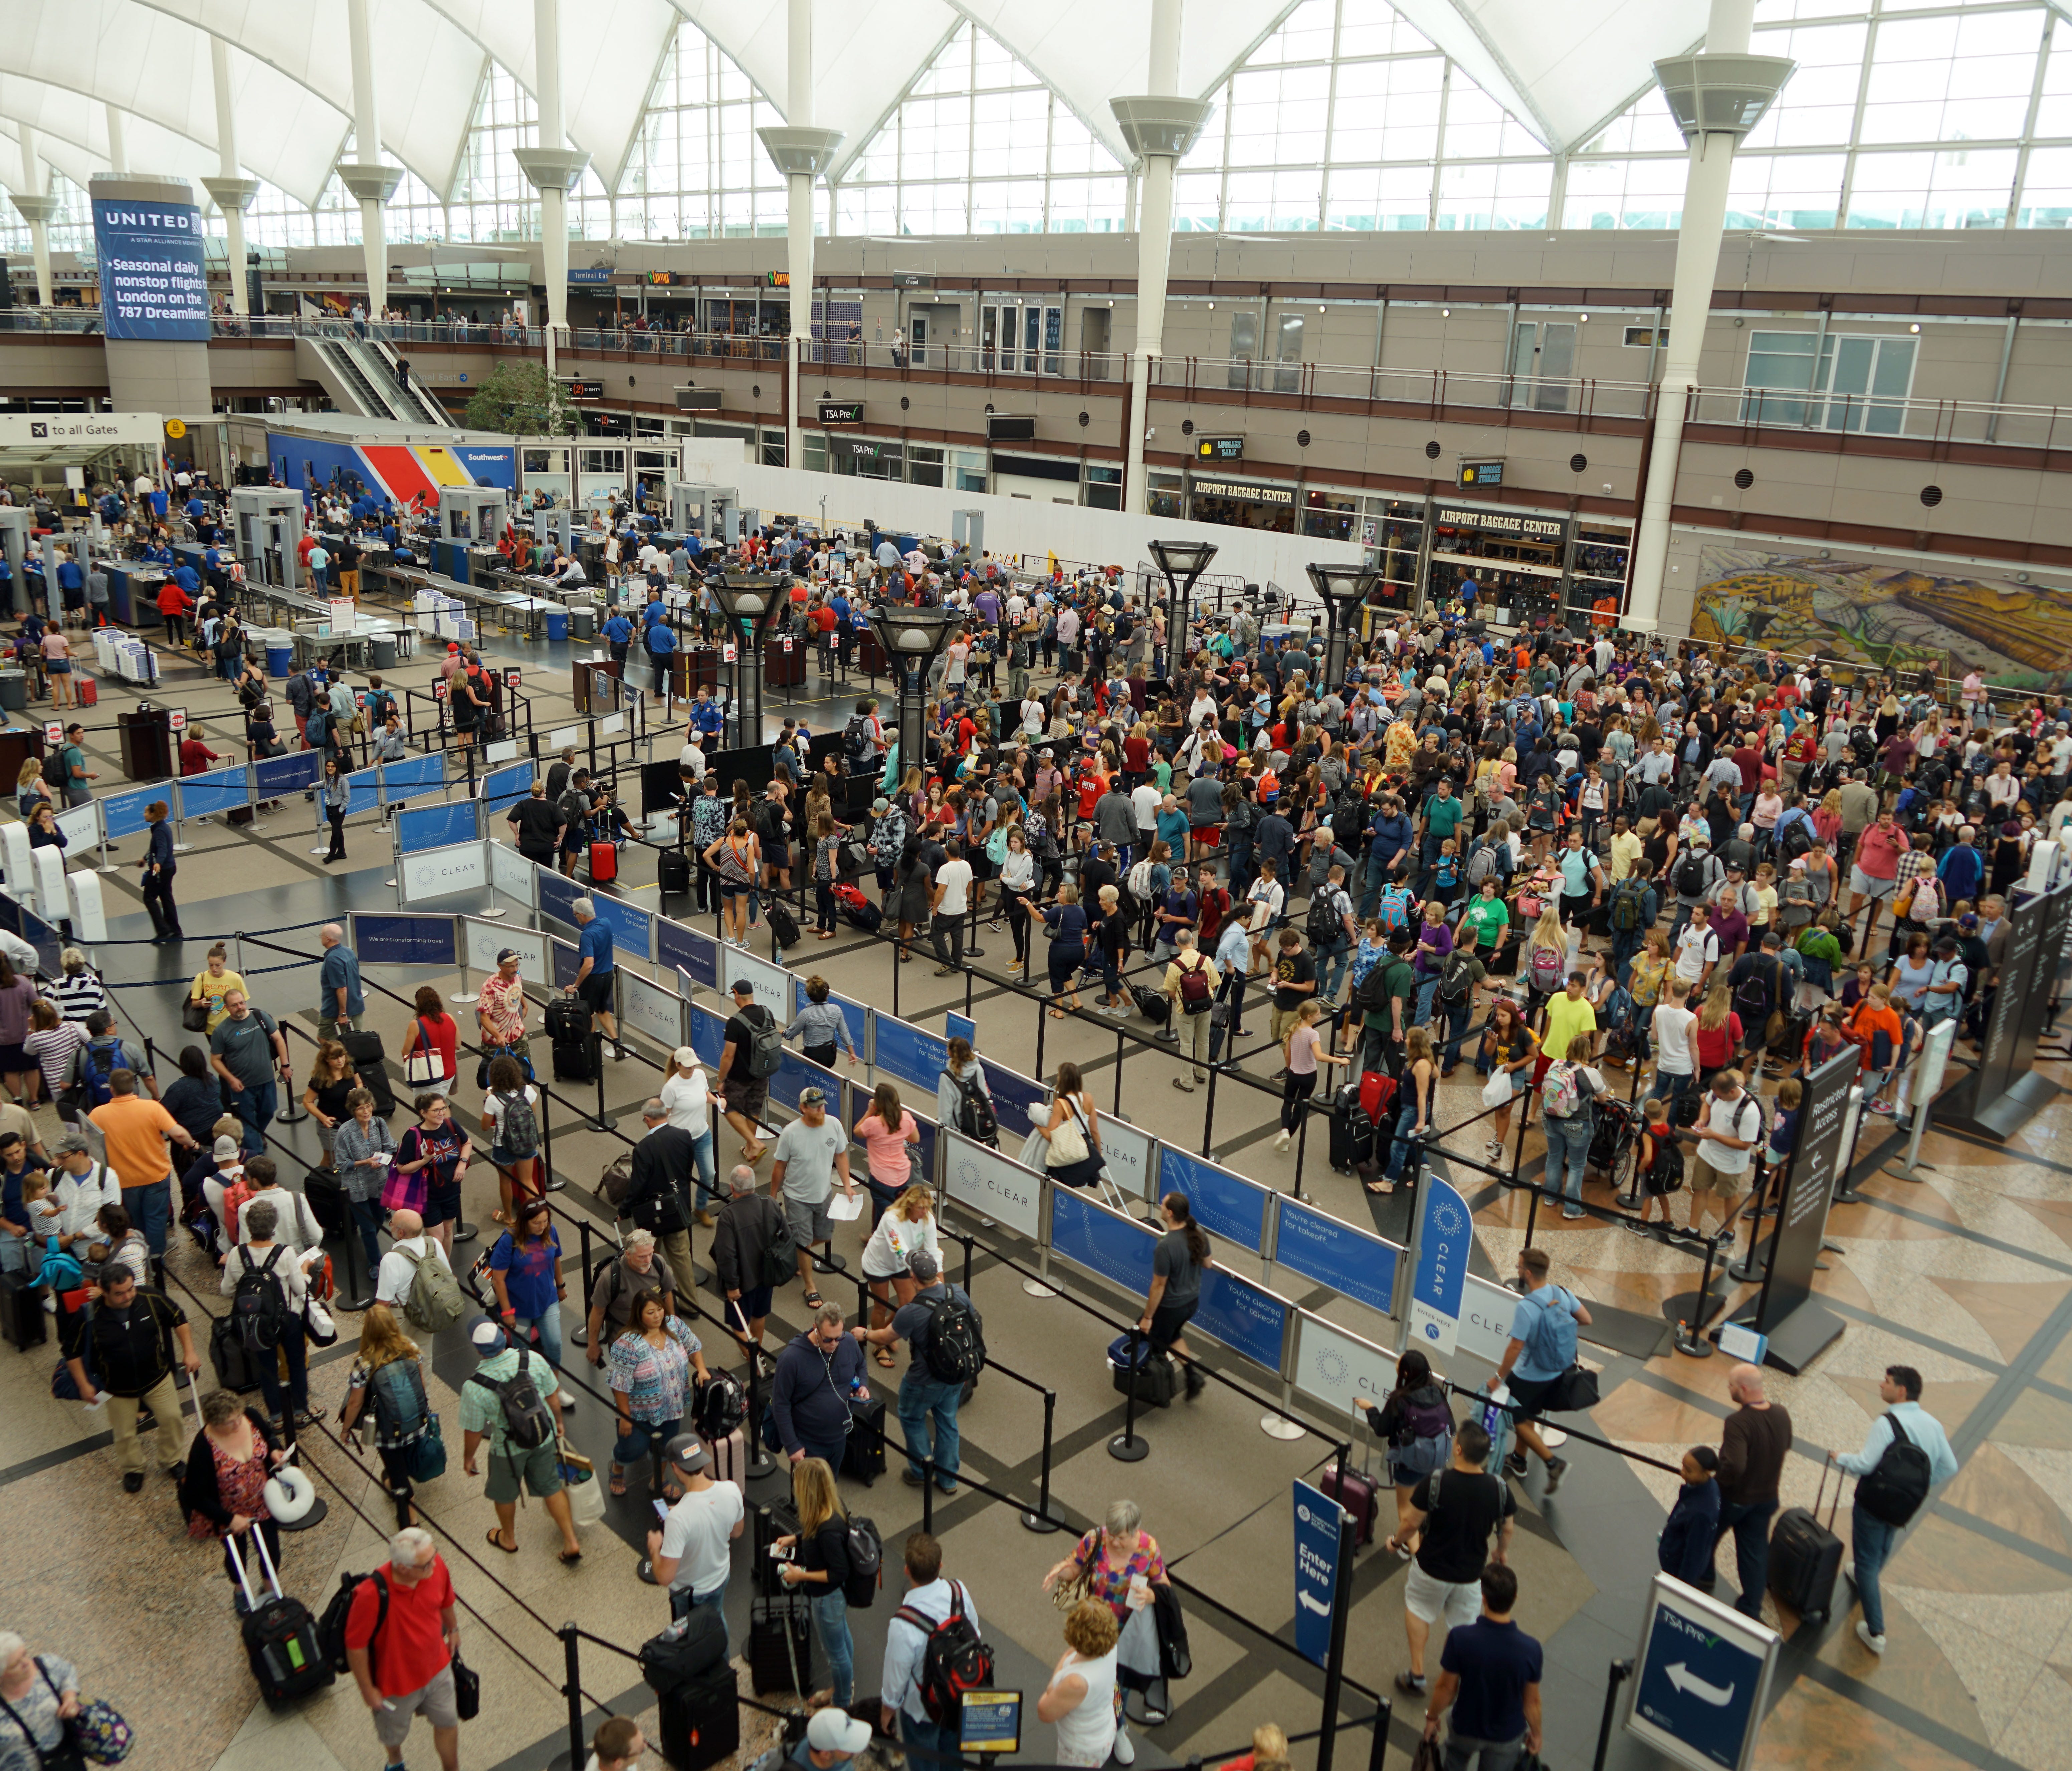 Hundreds of flyers wait in TSA security lines in Denver International Airport's Great Hall. Airport managers have launched a major renovation of the hall, hoping to speed up security screenings and improve the passenger experience.      